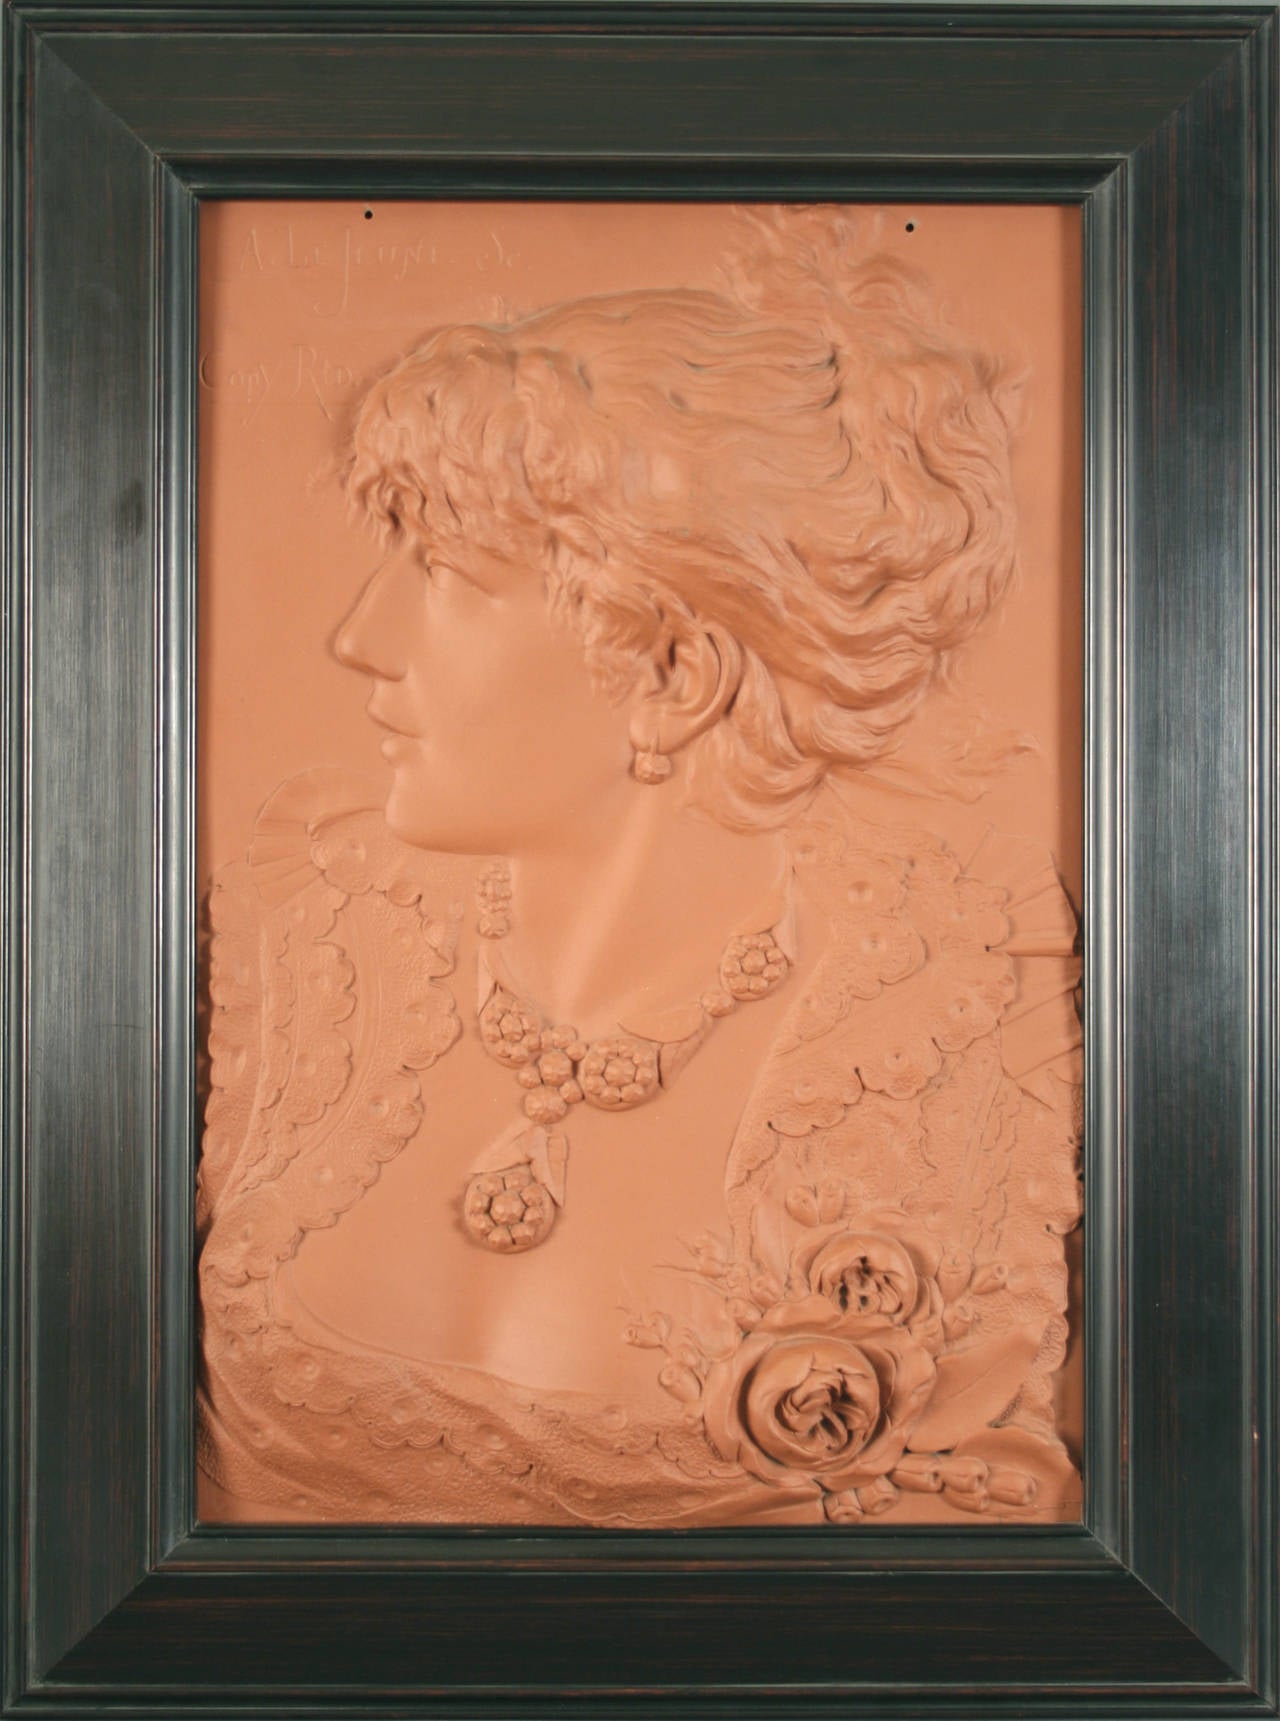 Uncommon American Art Nouveau period terra cotta wall plaque by Alphonse LeJeune, circa 1900, most likely the work of the Northwestern Terra Cotta Company of Chicago (1877-1956). The image is a stylish Victorian woman sculpted in high relief, quite